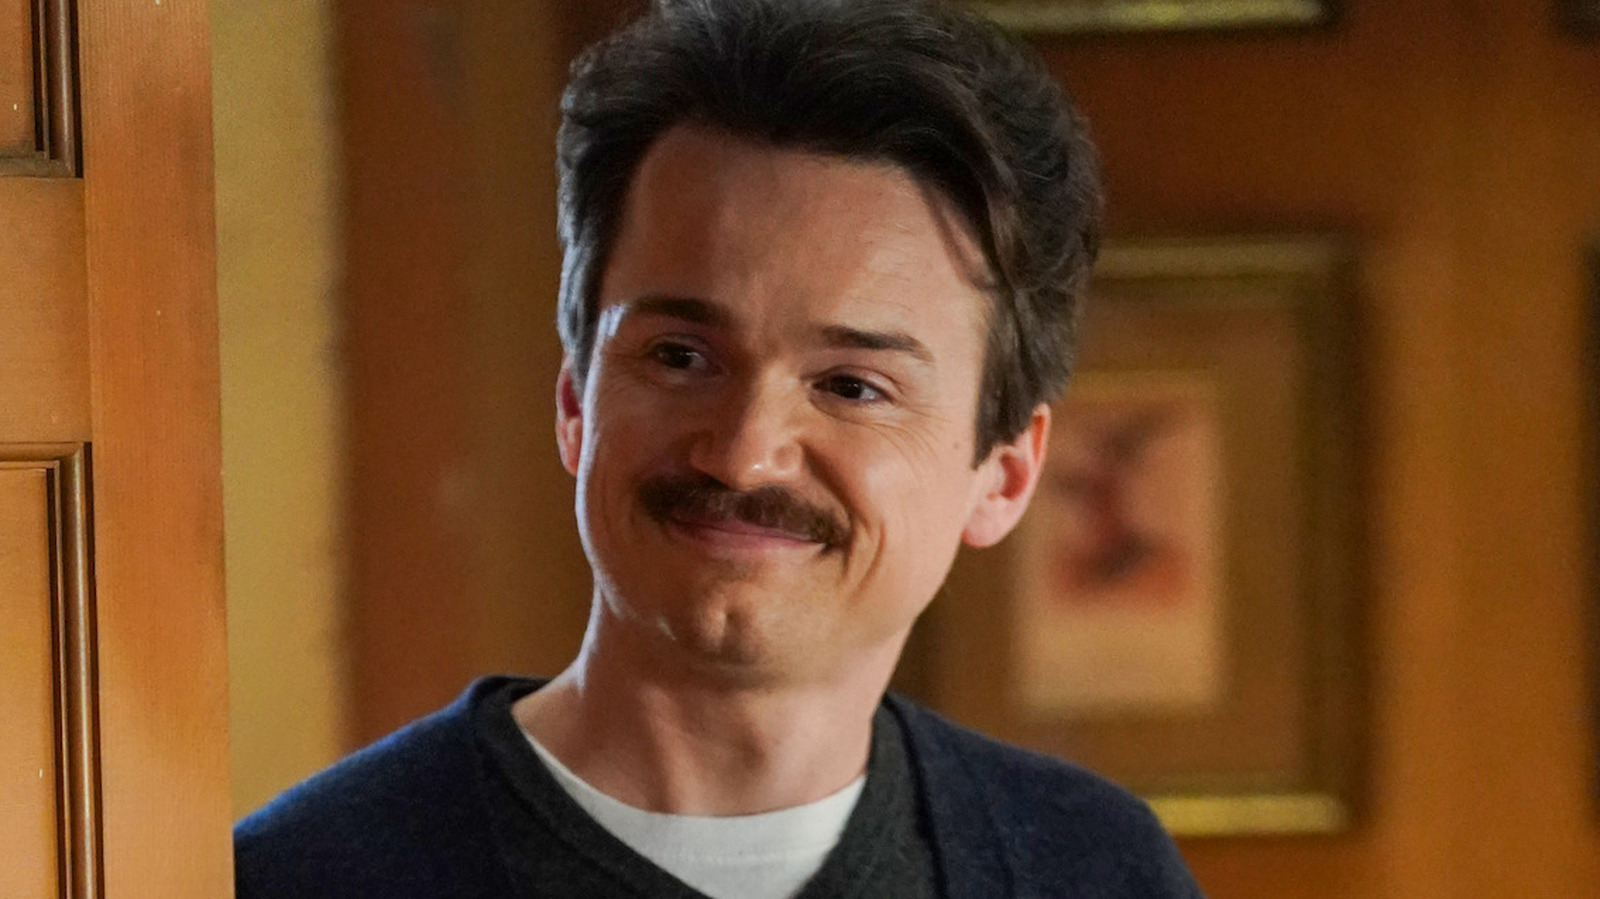 How old is pastor rob in young sheldon